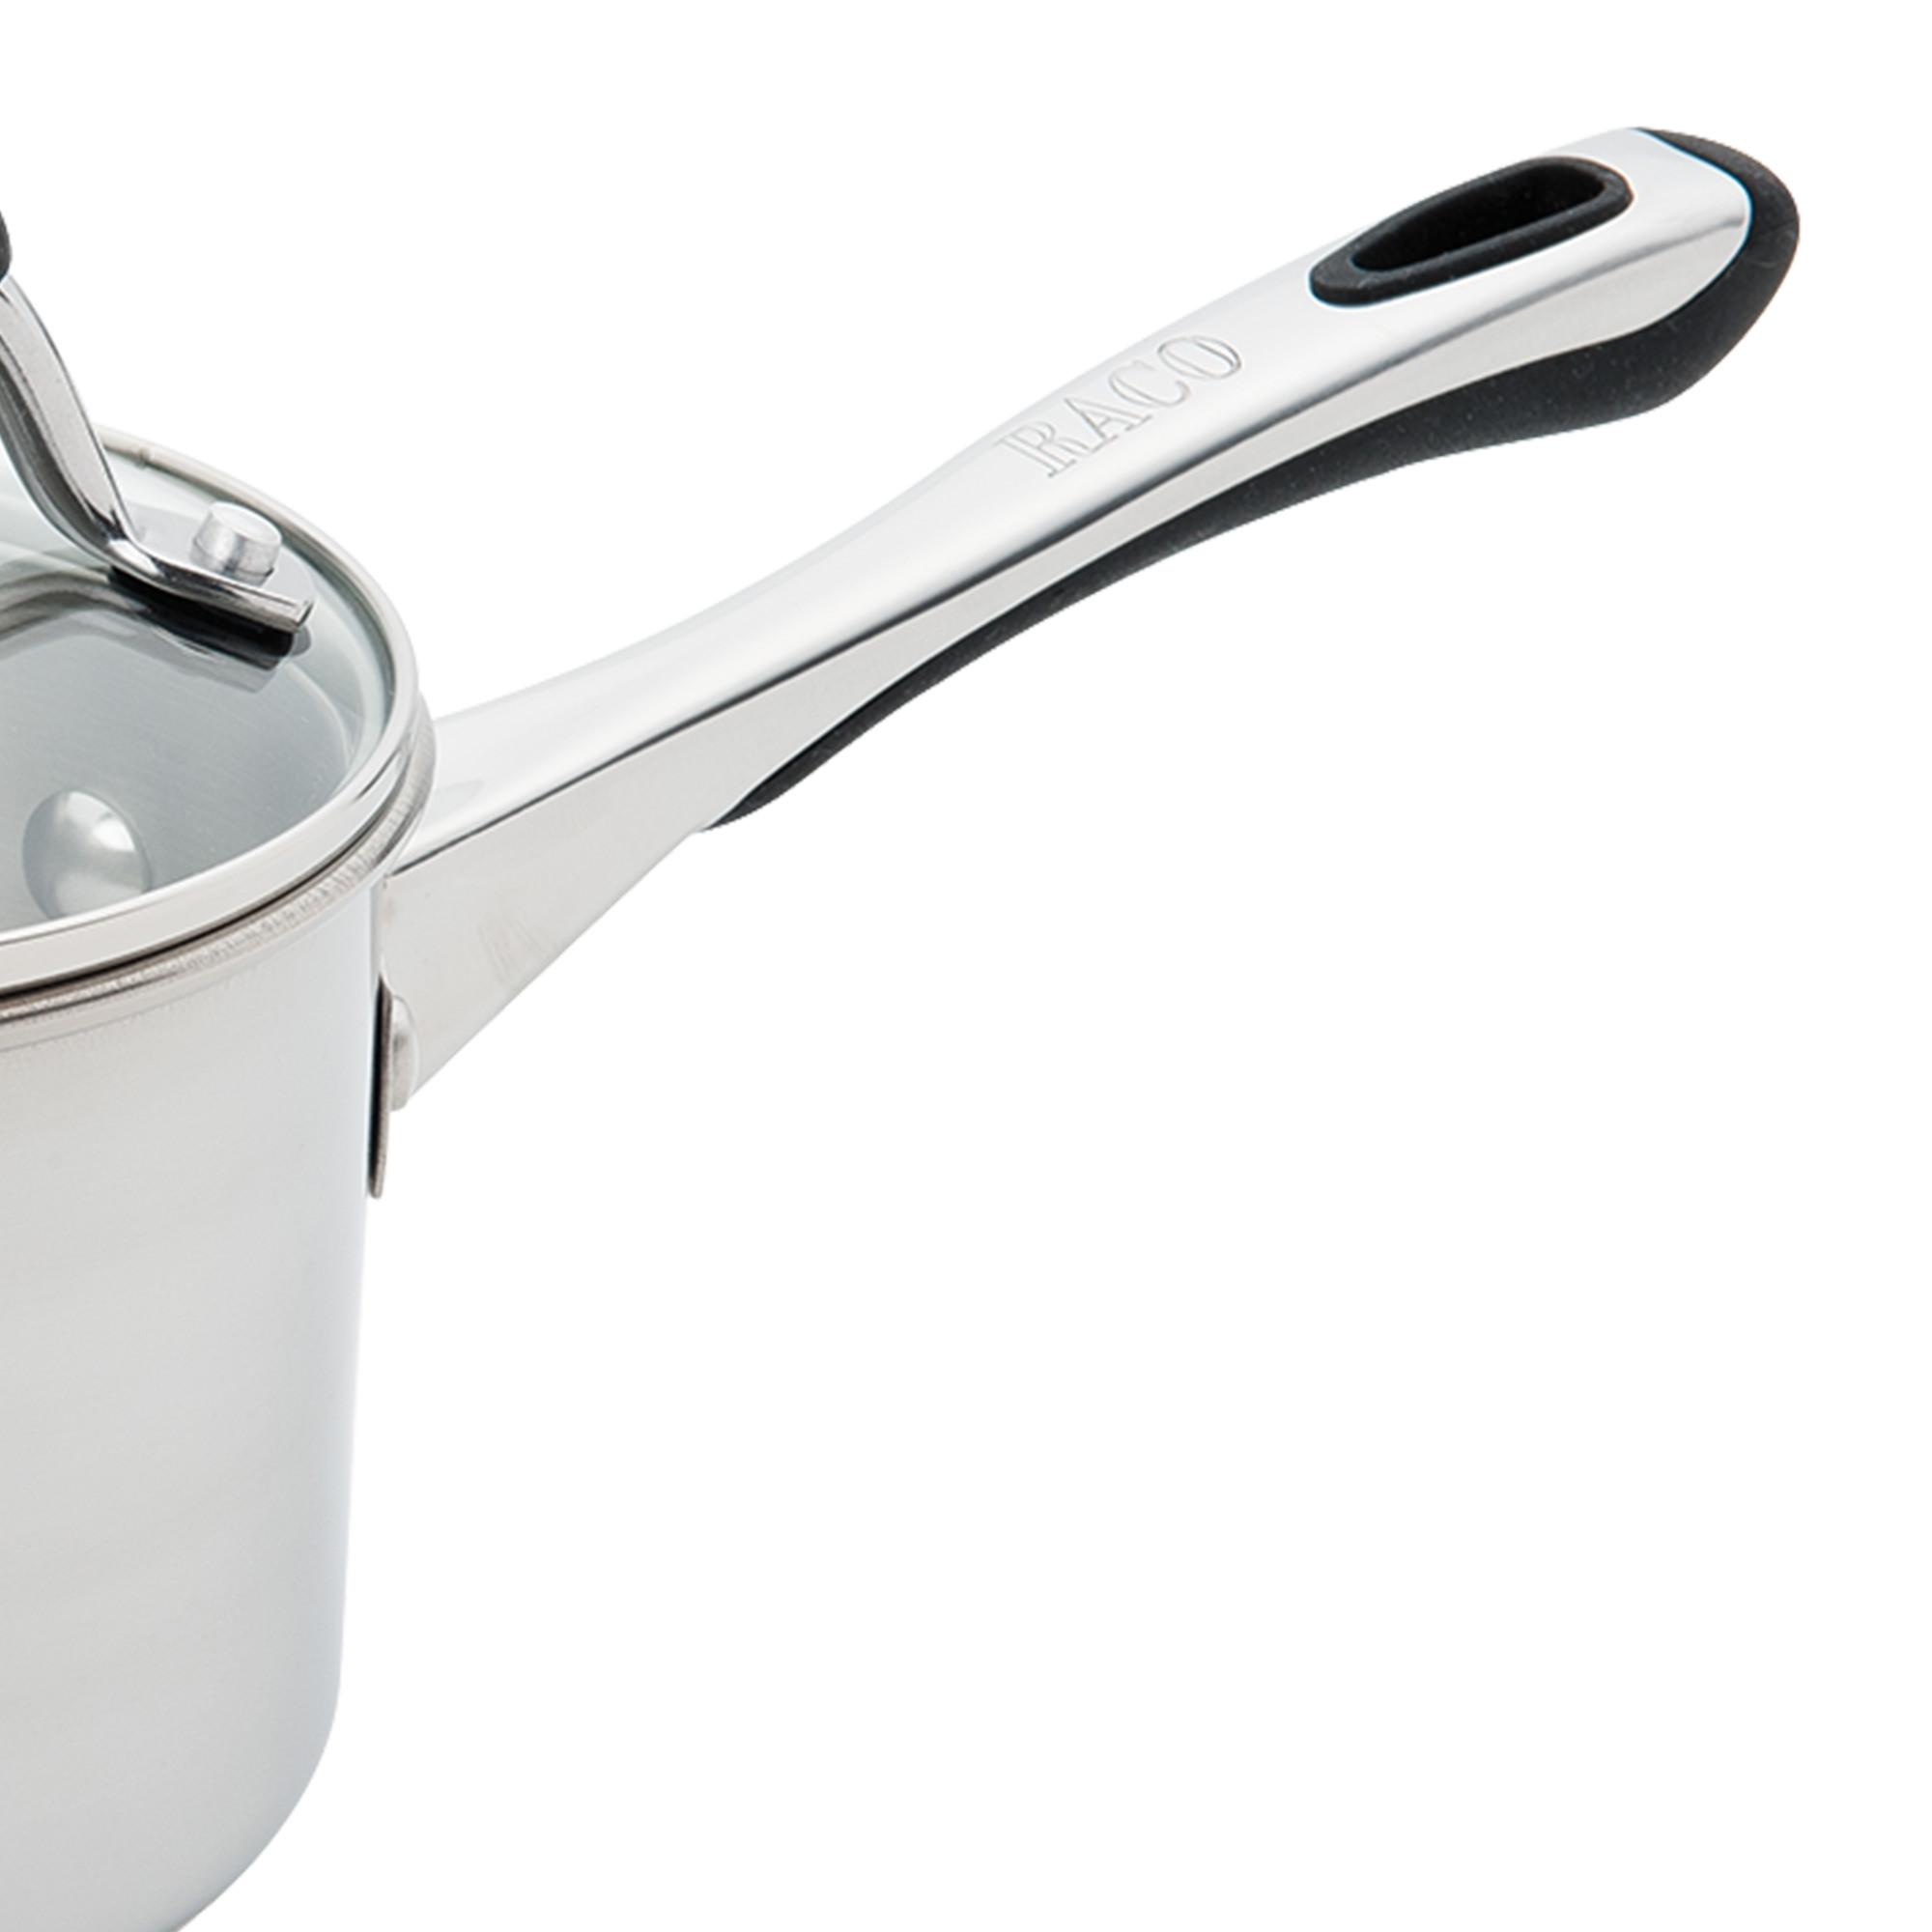 Raco Contemporary Stainless Steel Saucepan 16cm - 1.9L Image 5